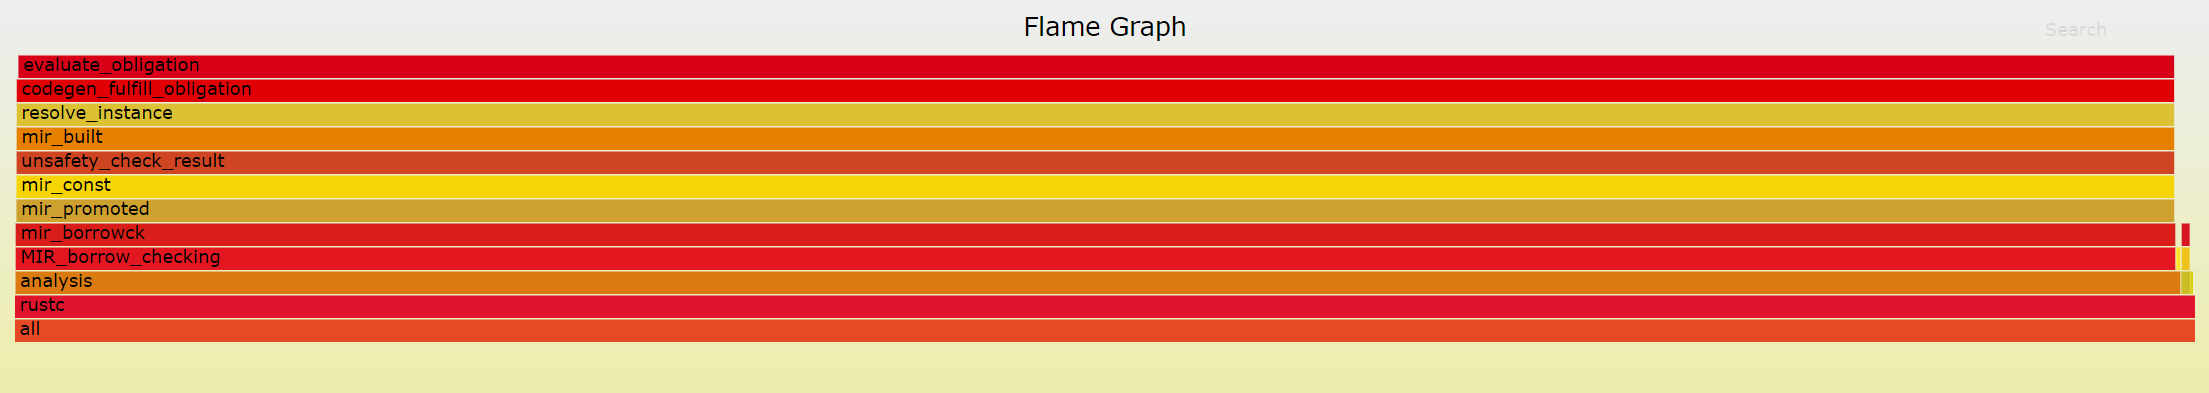 A flamegraph, showing that almost all time is spent in: all, rustc, analysis, MIR_borrow_checking, mir_borrowck, mir_promoted, mir_const, unsafety_check_result, mir_built, resolve_instance, codegen_fulfill_obligation, and evaluate_obligation